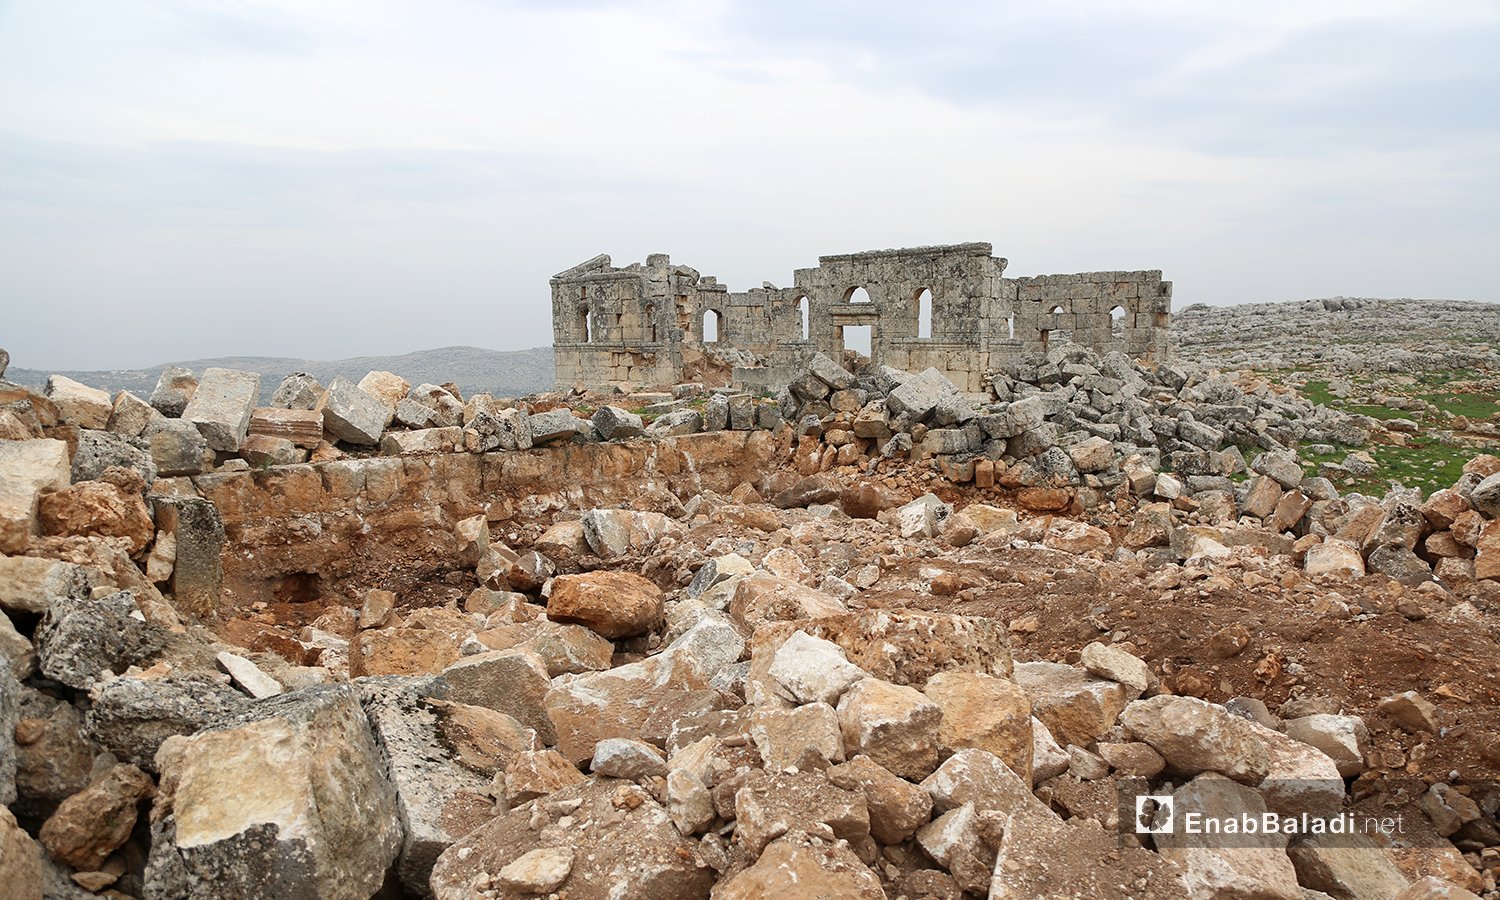 Wanton destruction of the Banqusa Archeological Site in the al-Wastani Mount, Idlib’s northern countryside – 13 January 2021 (Enab Baladi/Yousef Ghuraibi)